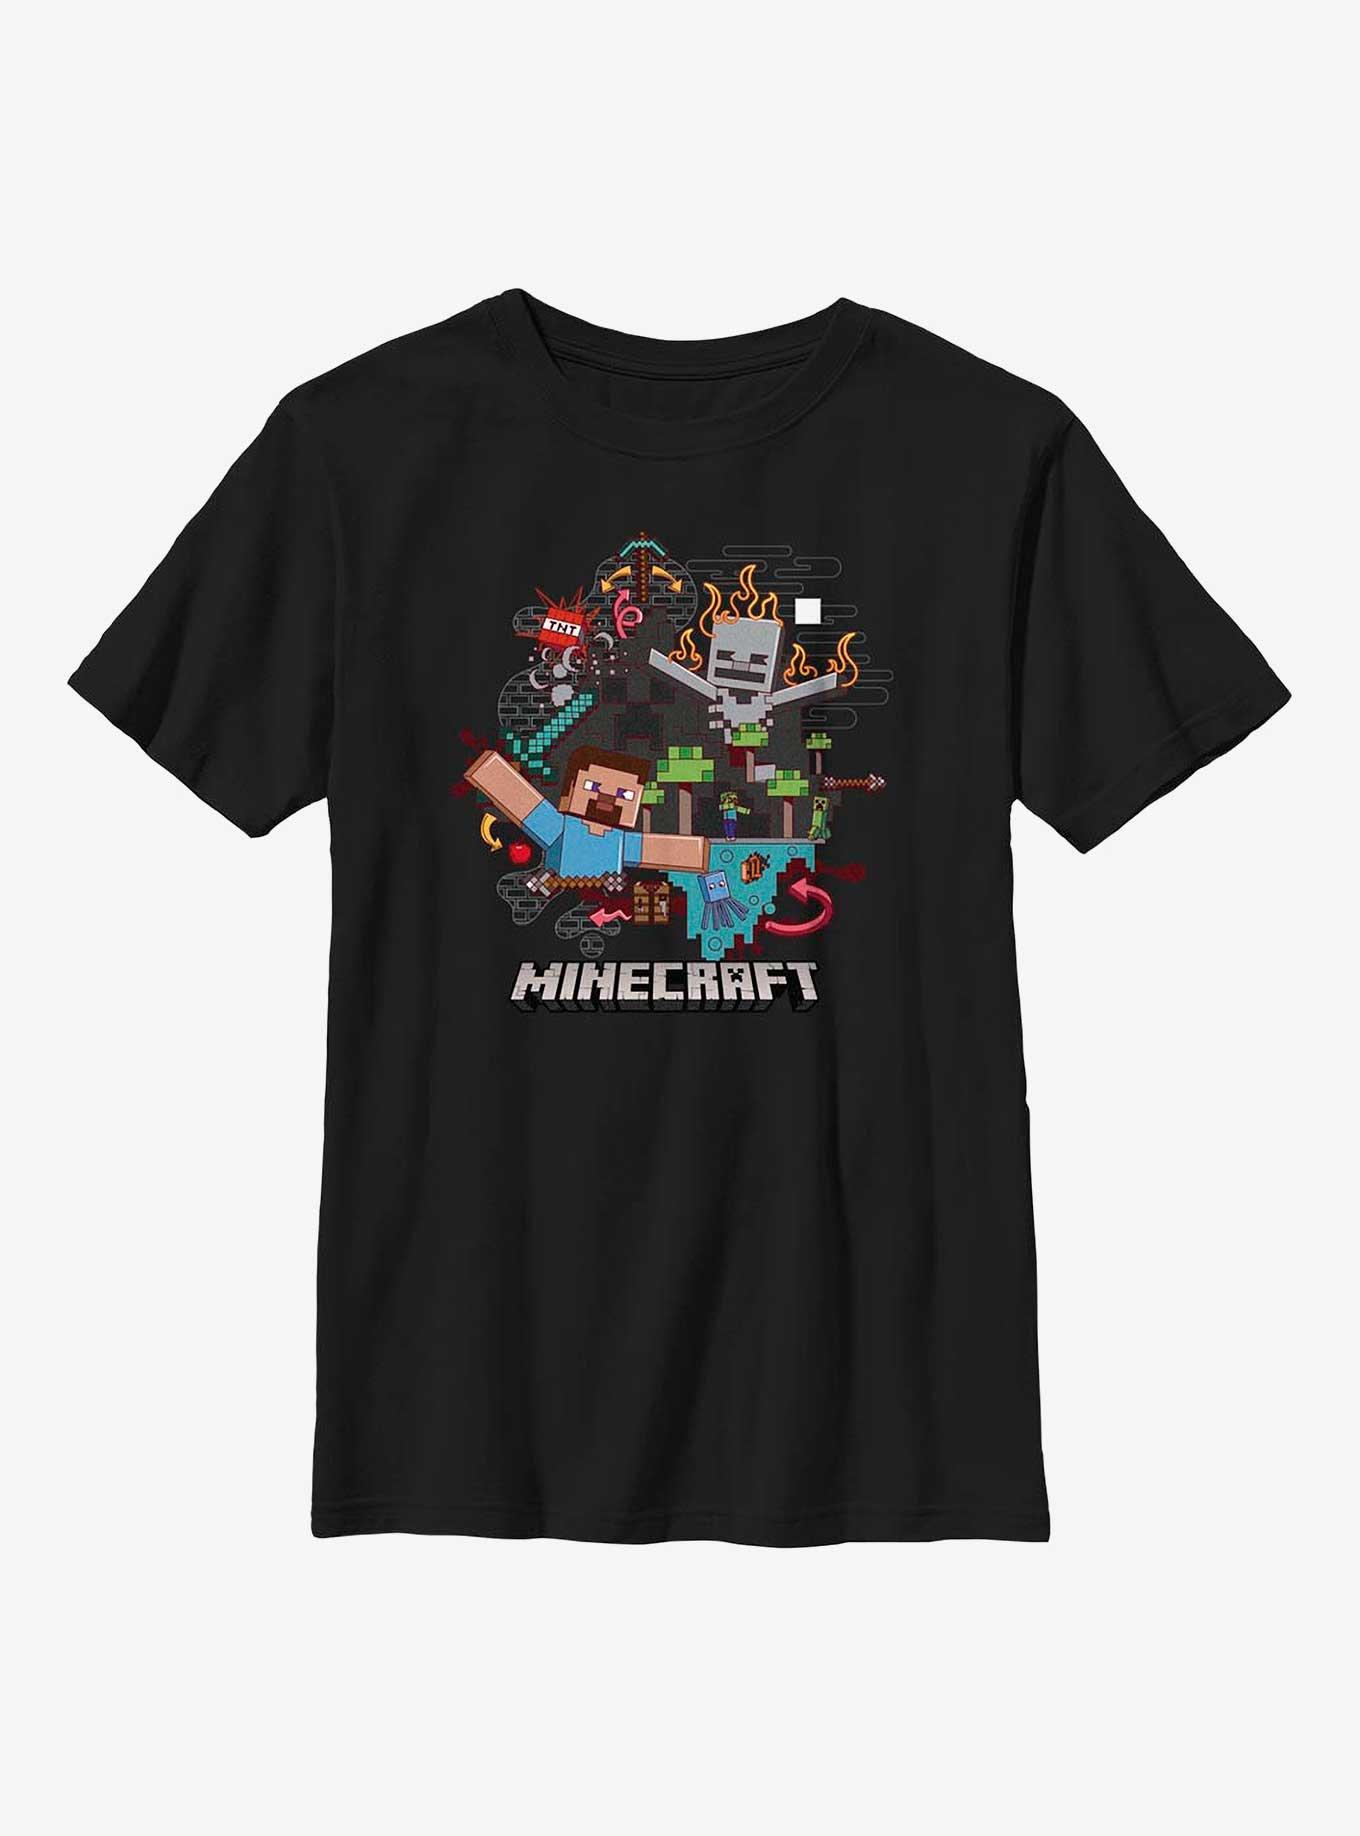 Minecraft Funtage Party Youth T-Shirt, BLACK, hi-res